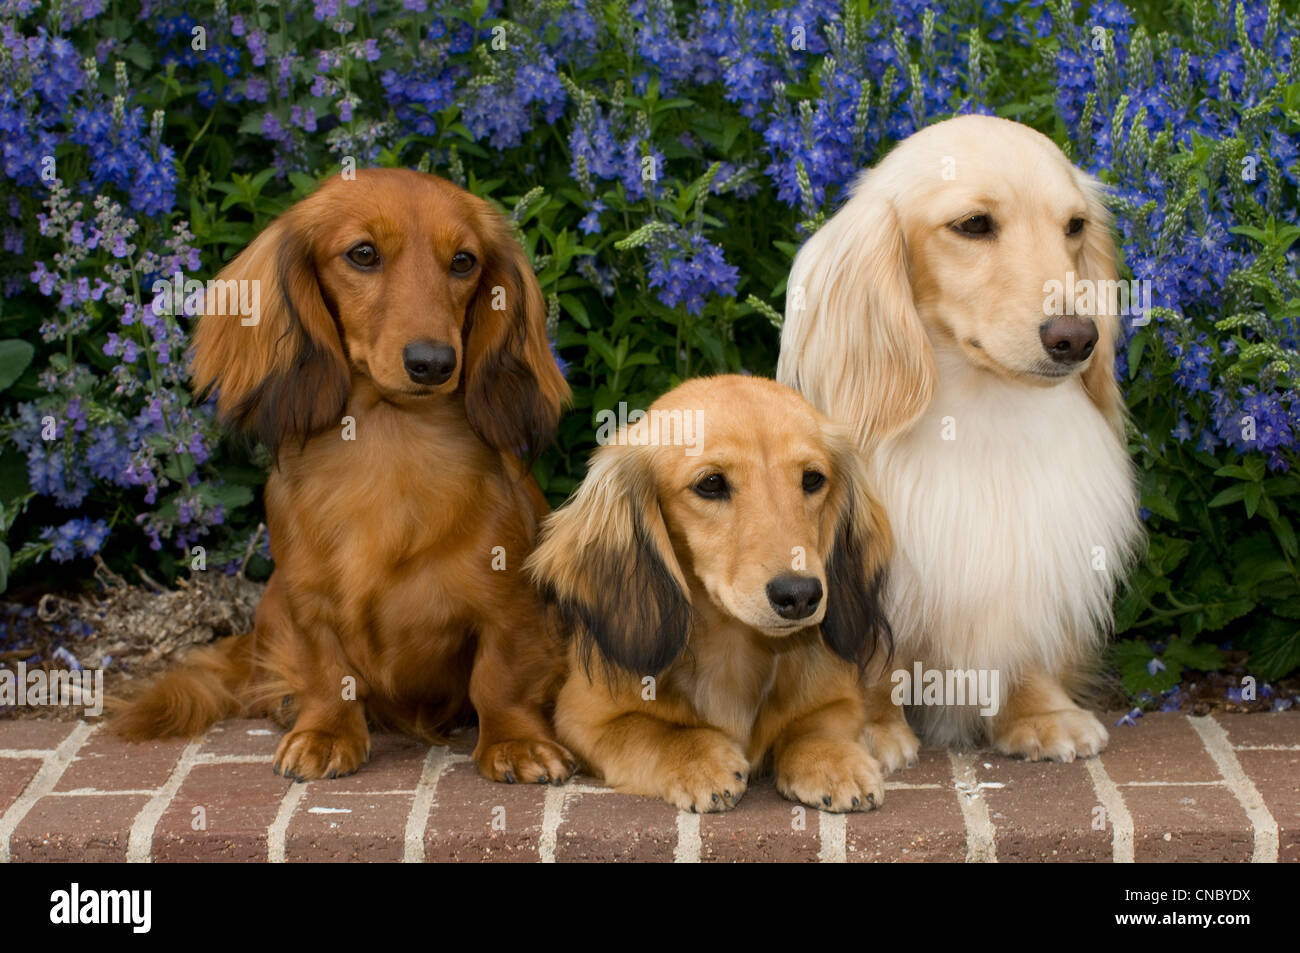 Three Long-haired dachshunds on brick wall with flowers behind Stock Photo